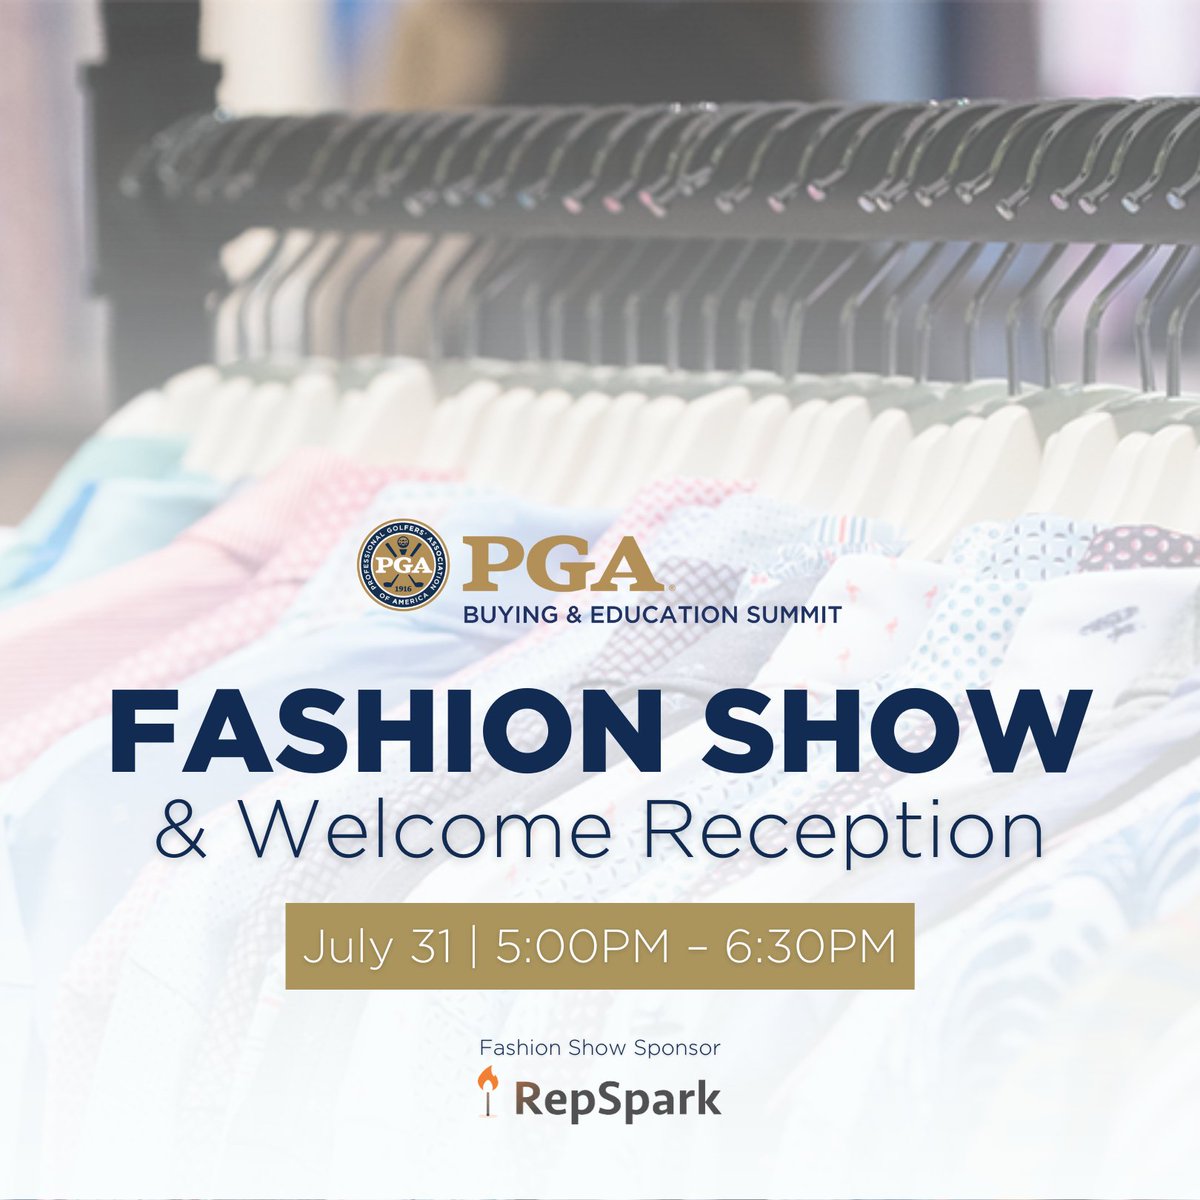 Feeling uncertain about what new styles to bring to your shop? Look no further than the #PGASummitFrisco Fashion Show sponsored by @RepSparkSystems!

Join us at 5:00pm for a Welcome Reception and stay for the Fashion Show at 5:30pm. More details here: bit.ly/3X5eMb1